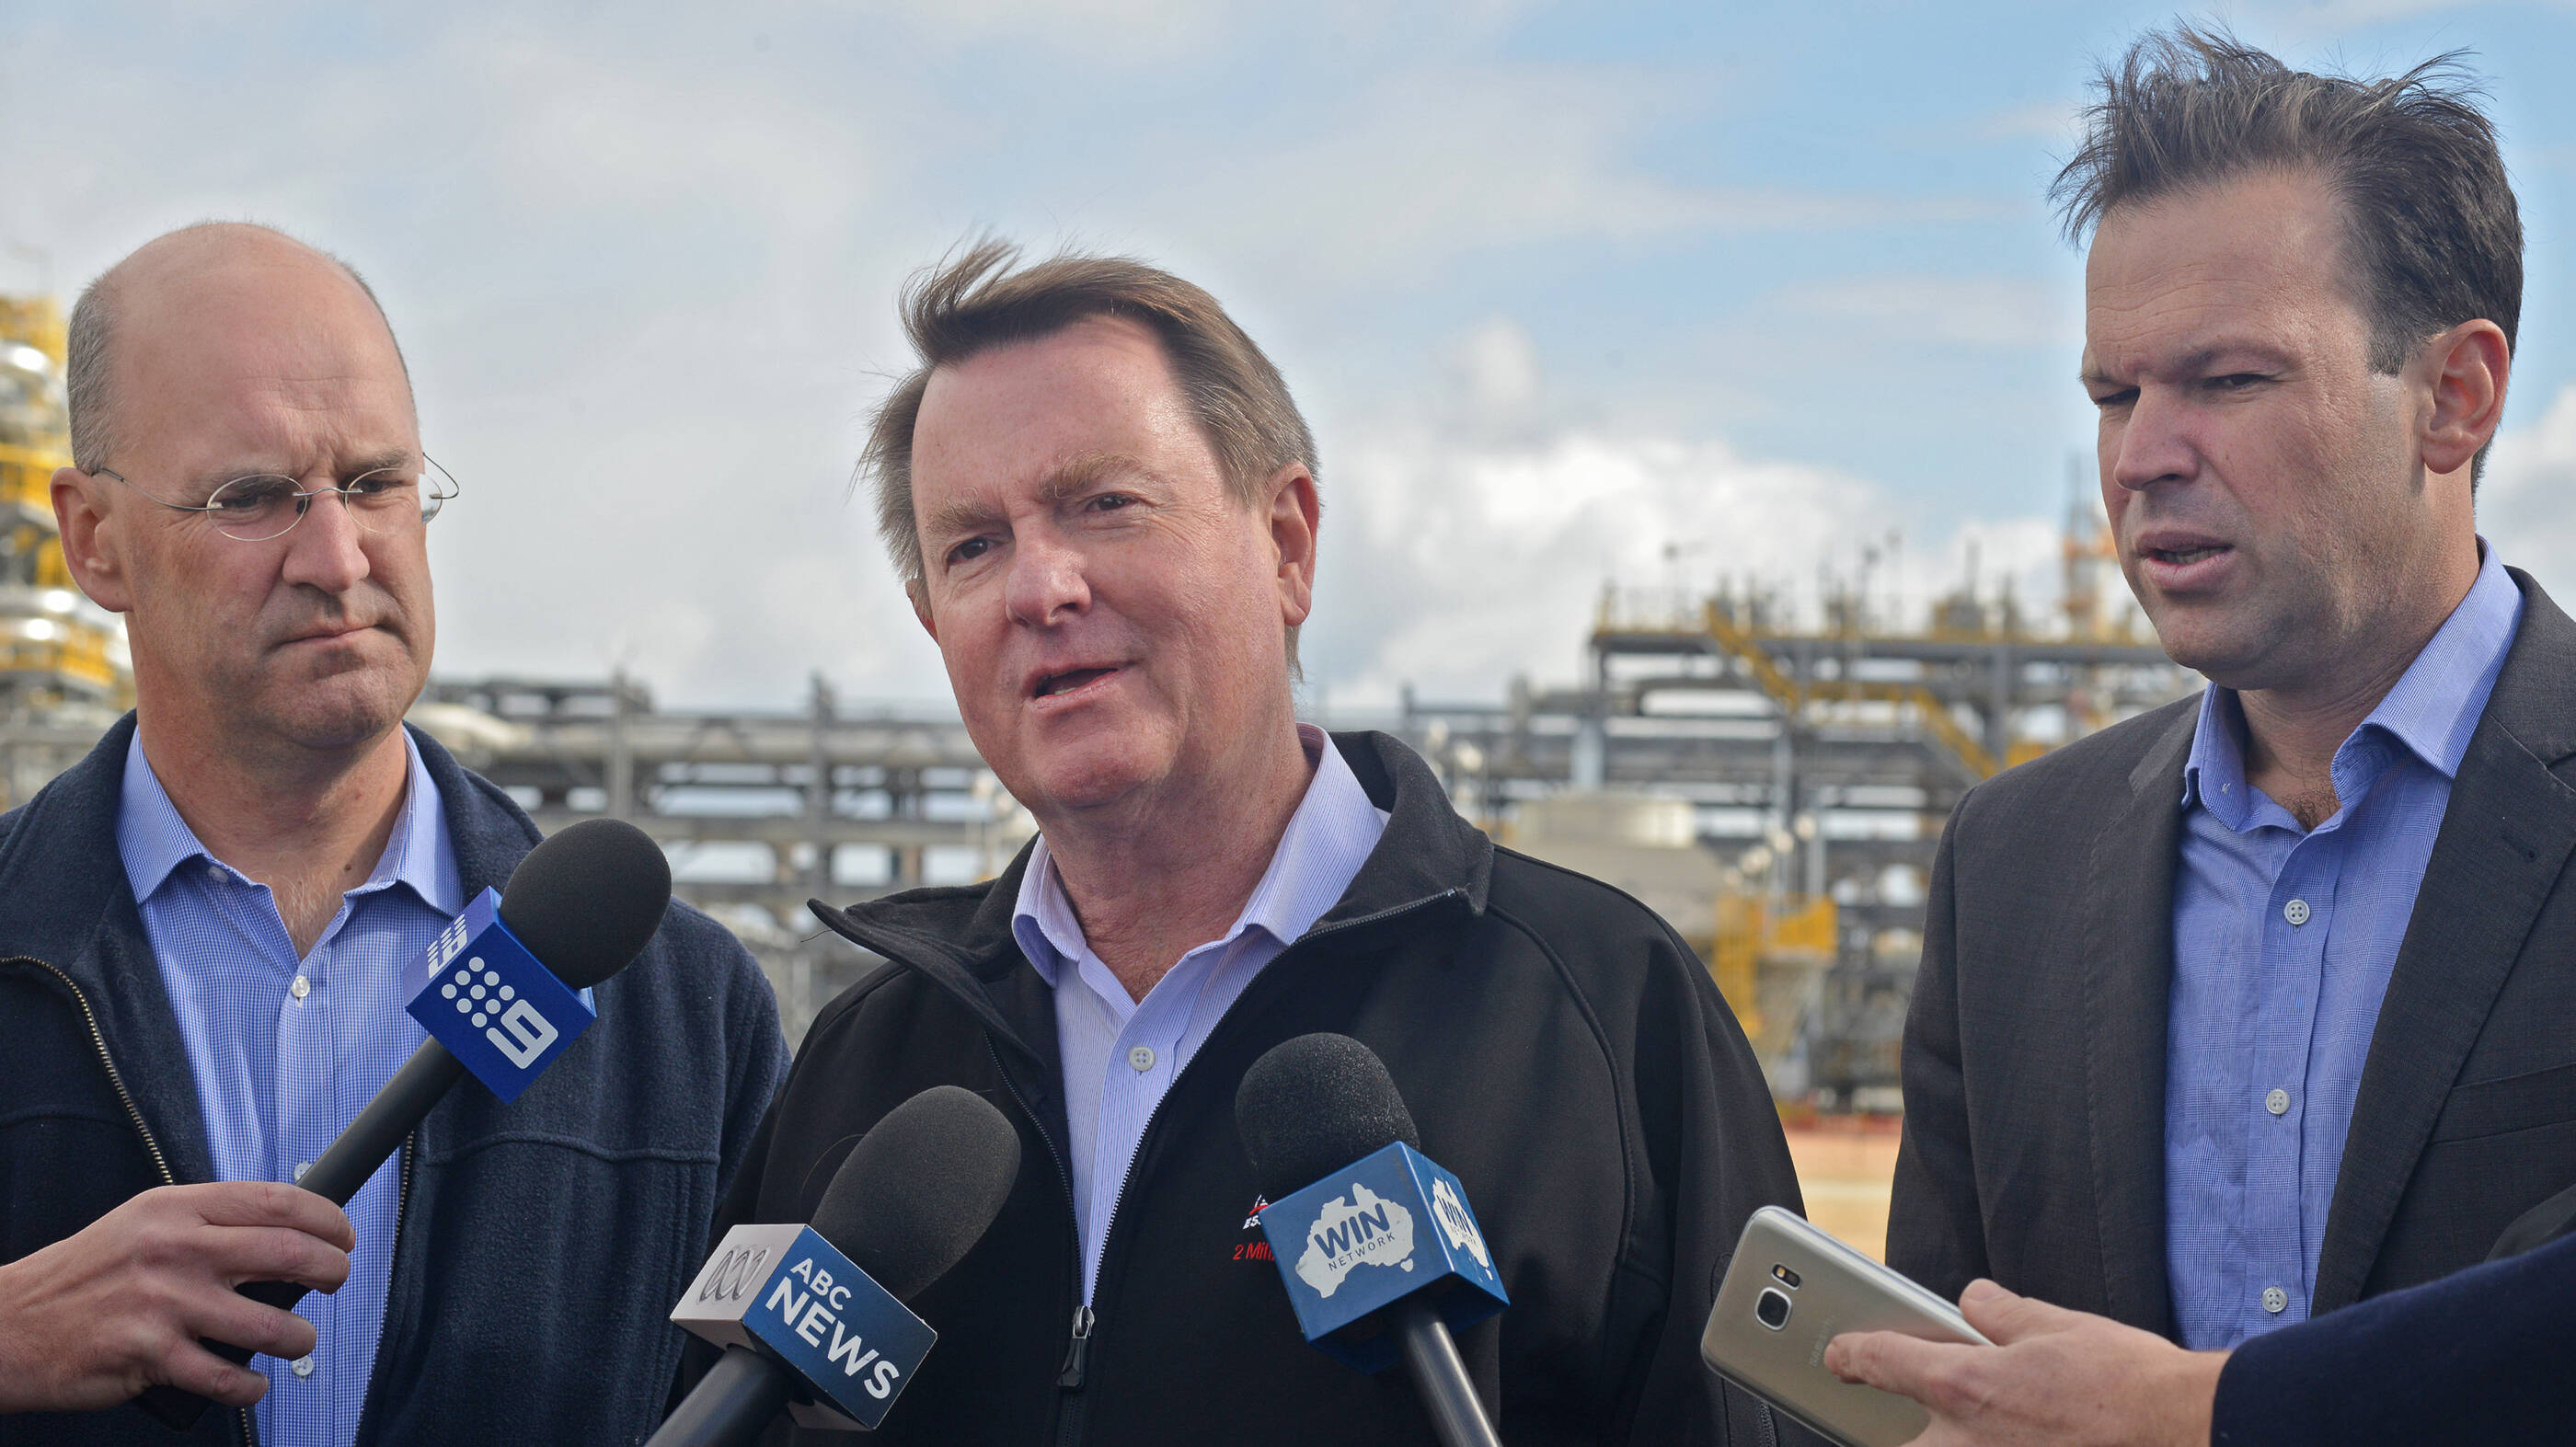 Richard talks to the media at the opening of the Longford Gas Conditioning Plant in 2017